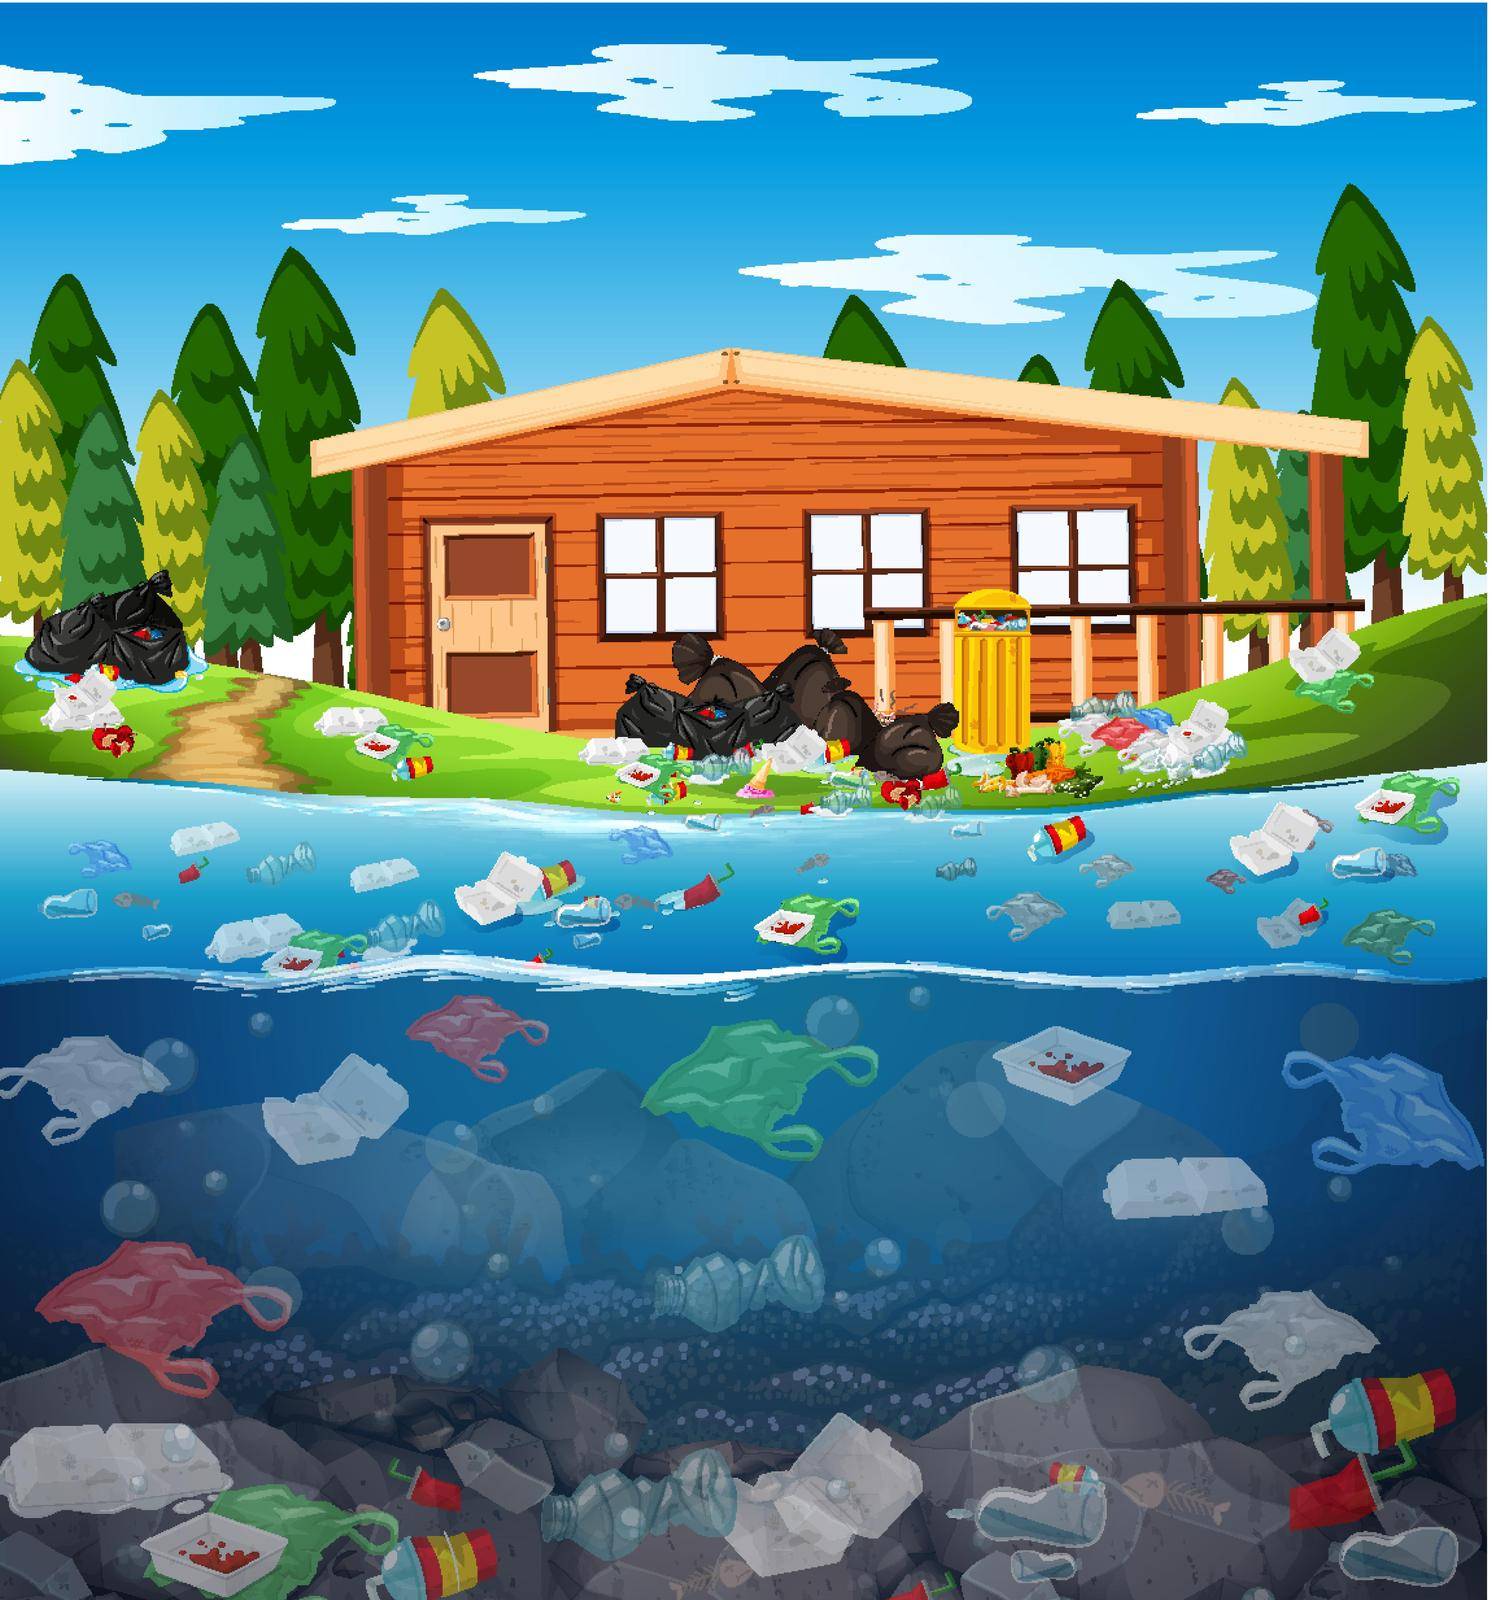 Water pollution with plastic bags in river illustration